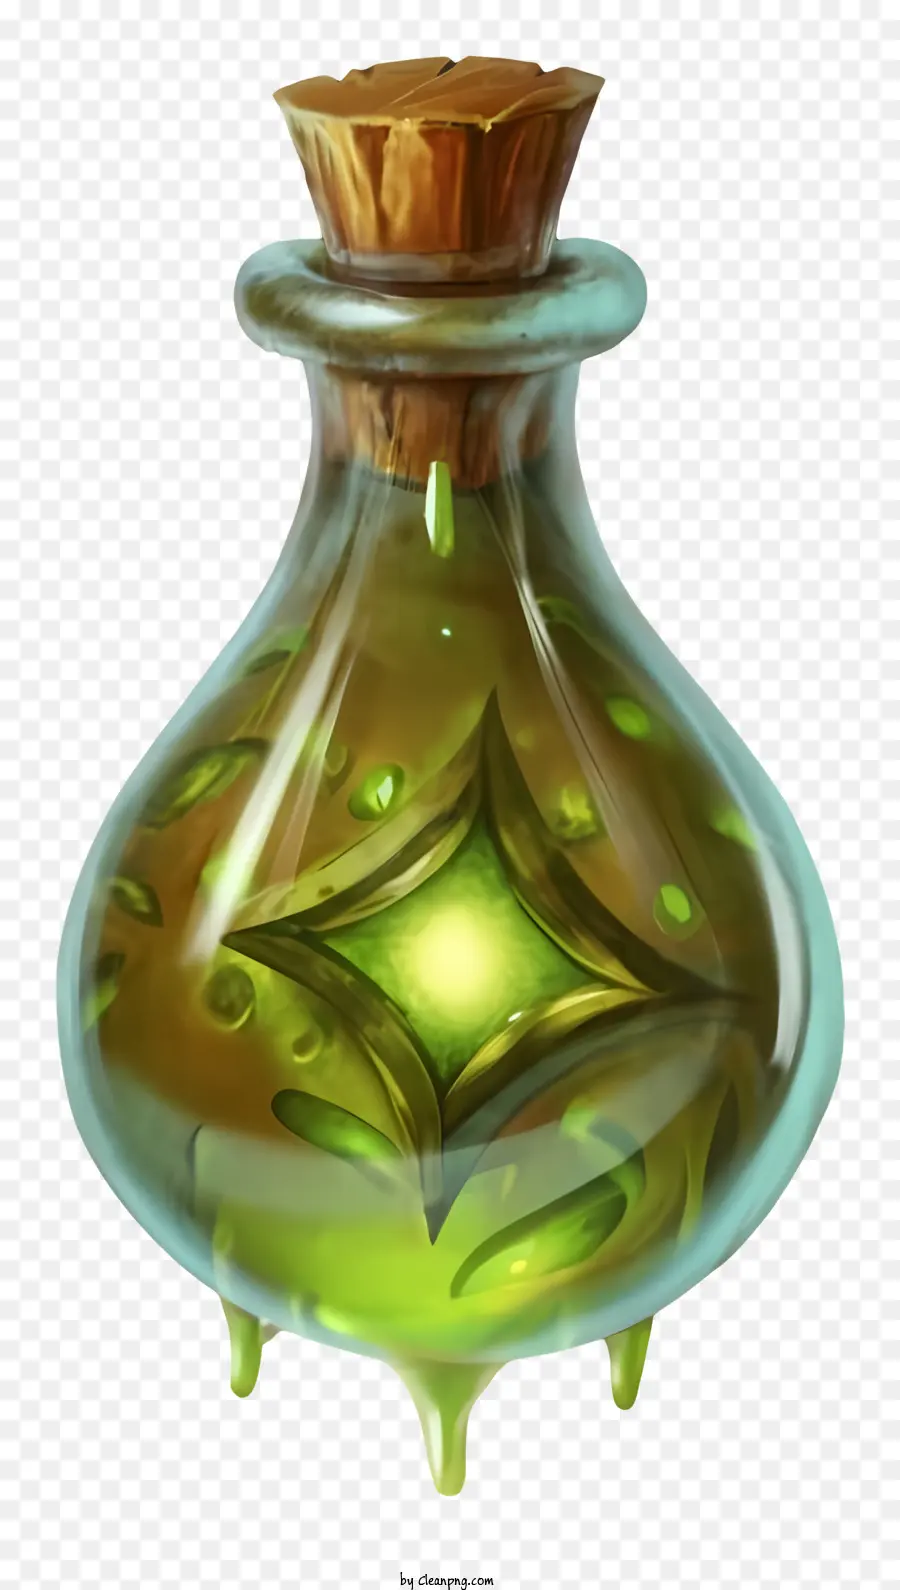 glass bottle green liquid small size clear glass shining